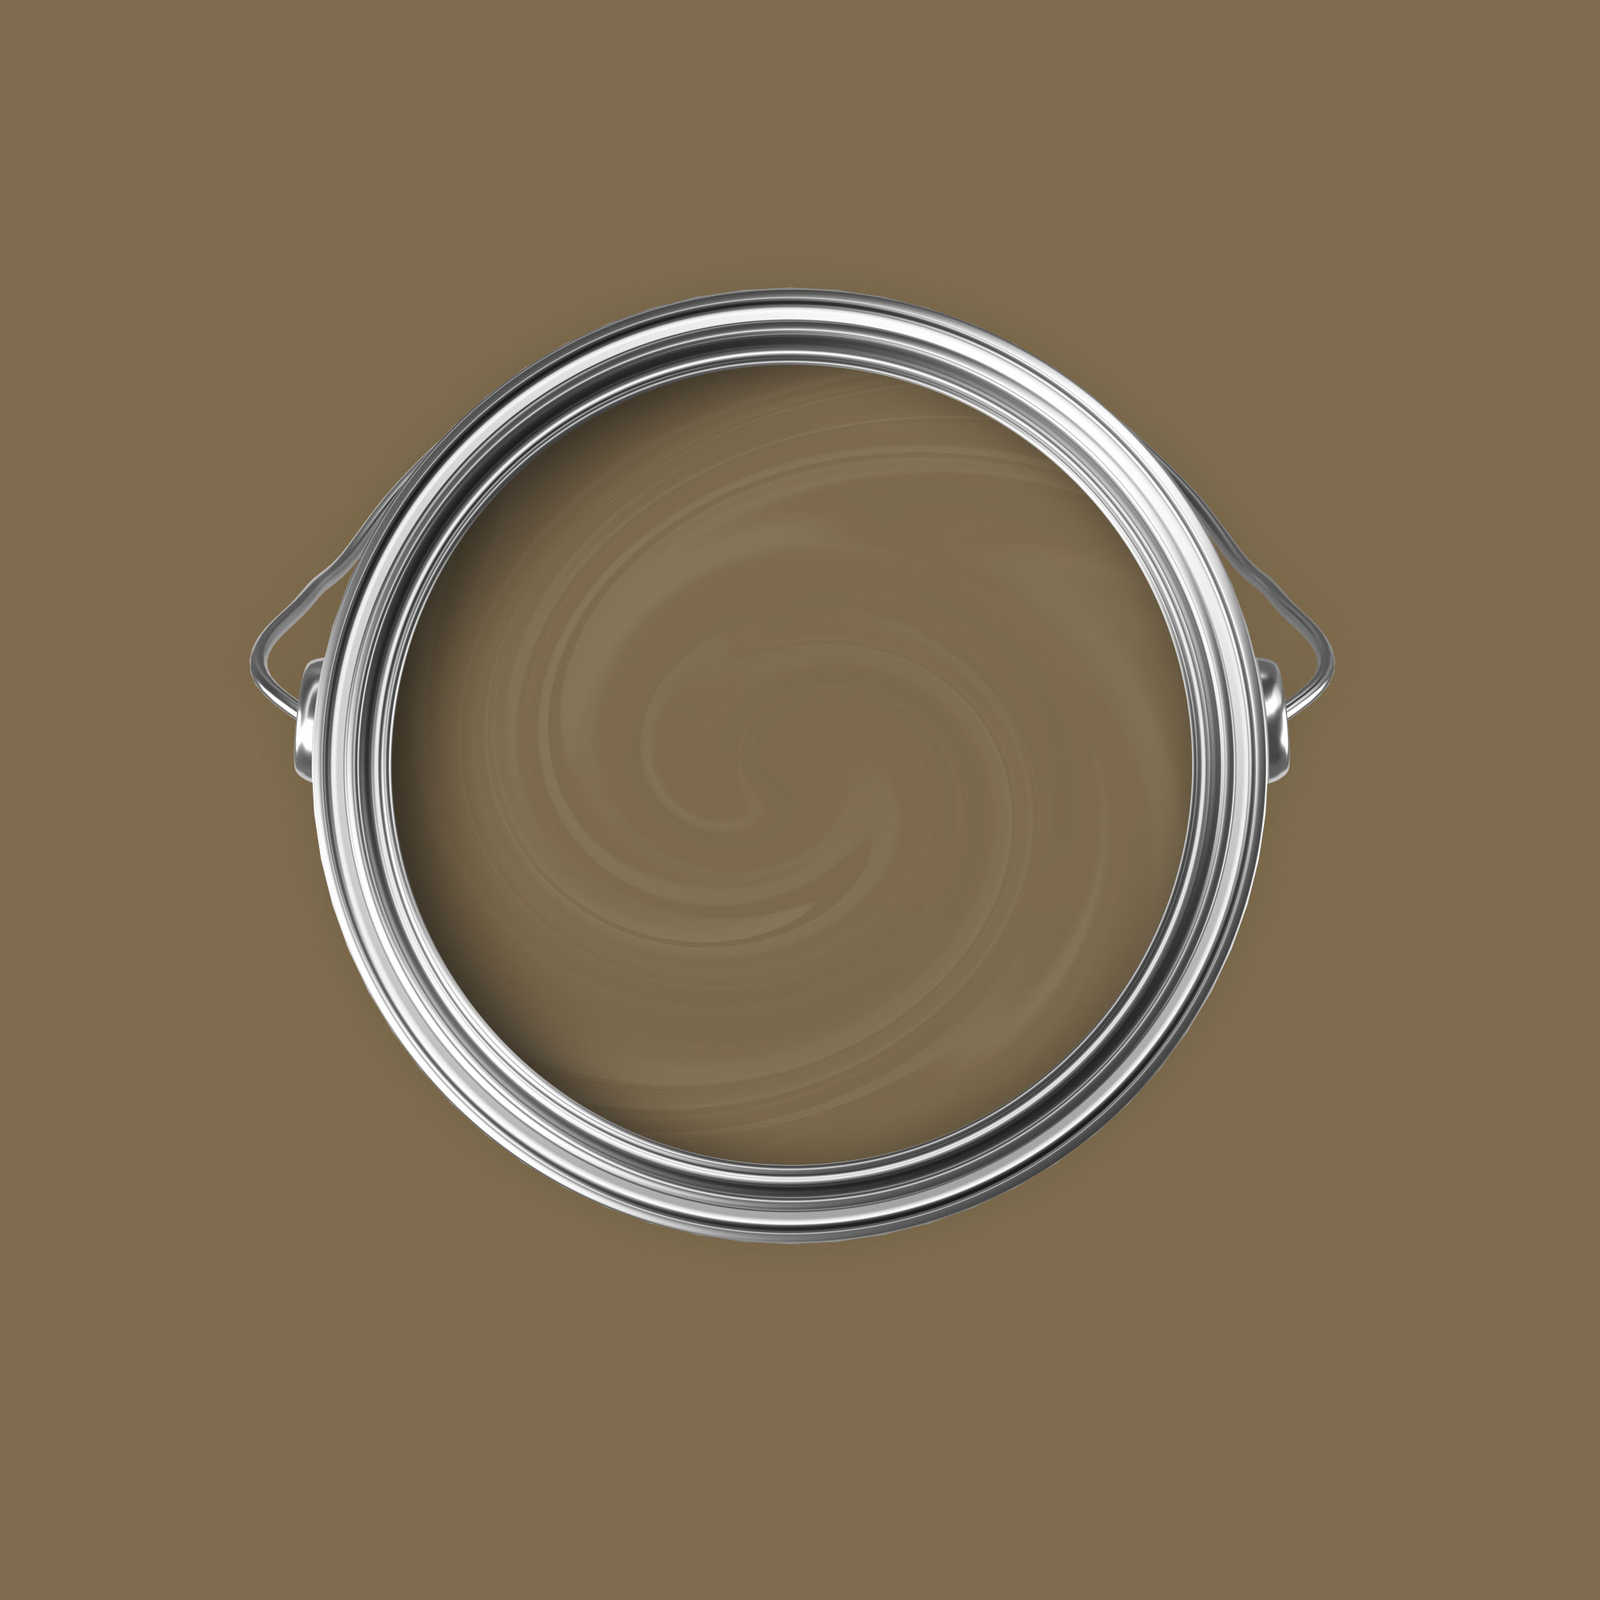             Premium Wall Paint Friendly Brown »Essential Earth« NW712 – 5 litre
        